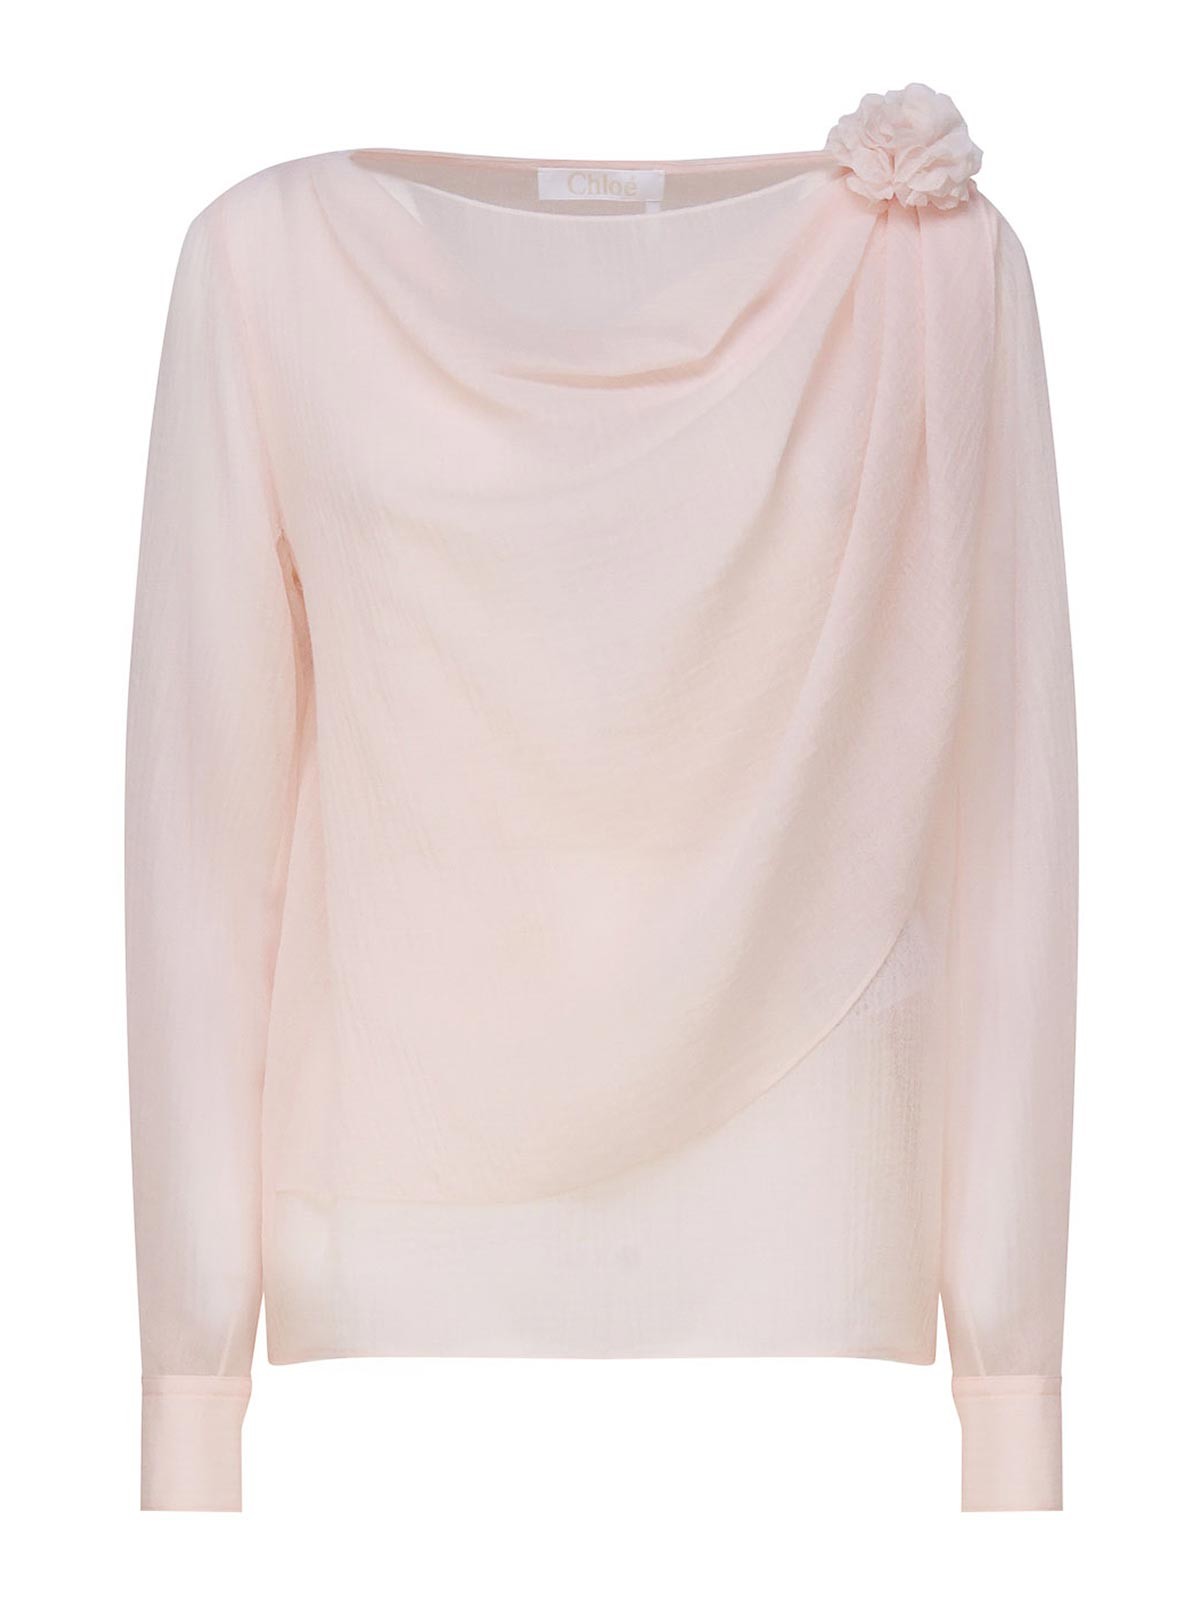 Chloé Draped Top With Boat Neckline In Nude & Neutrals